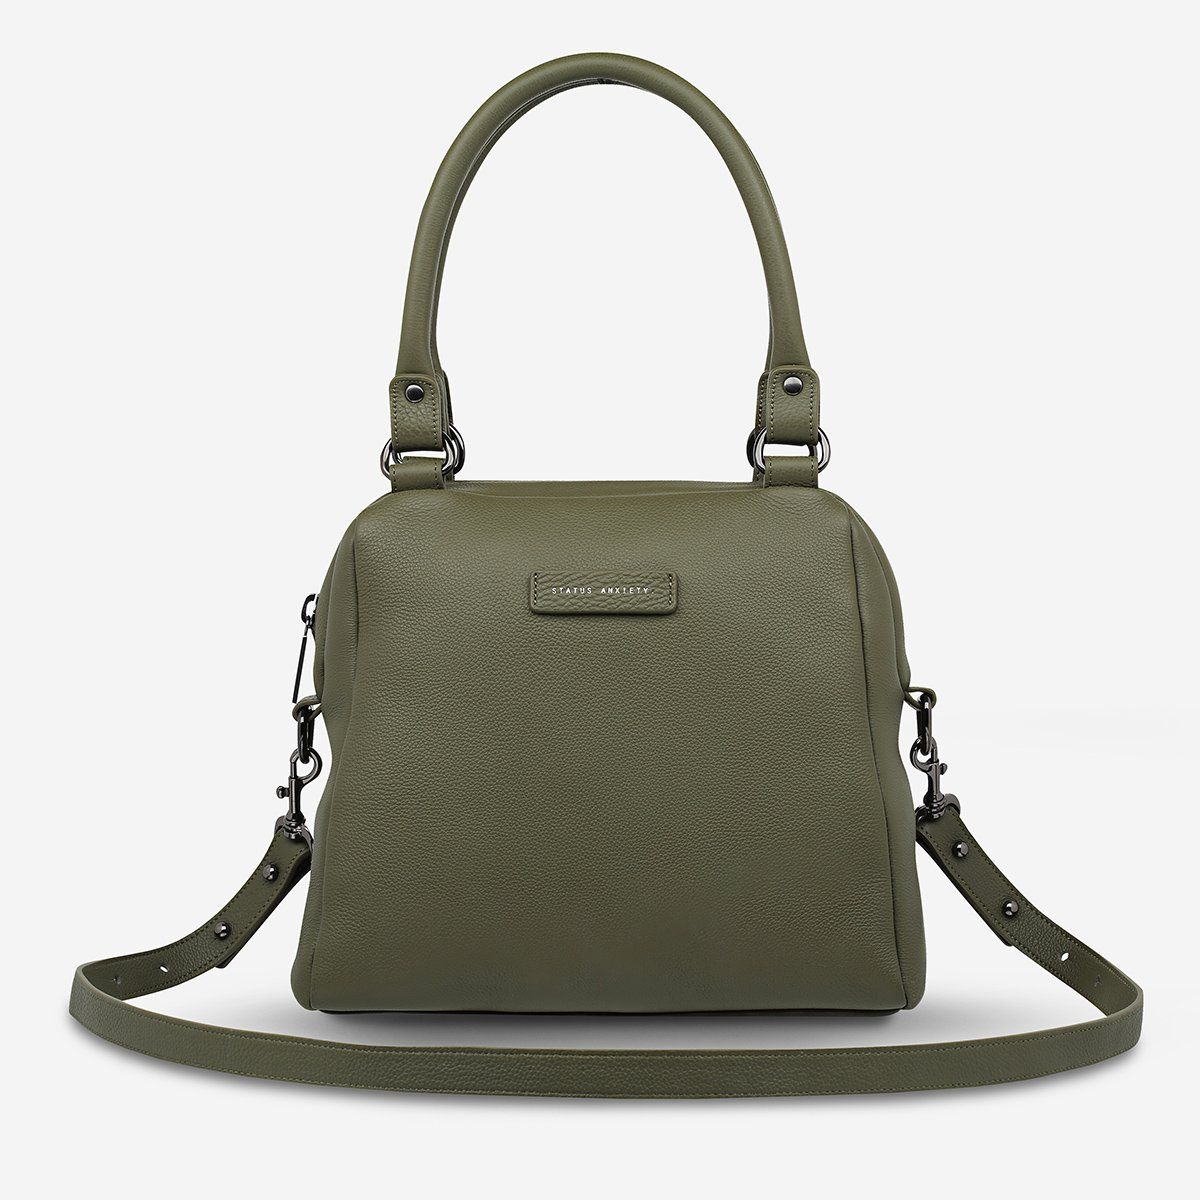 STATUS ANXIETY LAST MOUNTAINS BAG  The Status Anxiety Last Mountains Bag is the perfect bag for us girls who need a bigger bag for all our daily essentials!  In trendy Tan, Khaki, Green, Black Bubble or Navy Blue, this compact yet tall design was crafted using soft shrunken Brazilian pebble leather.  This bag features signature 'Status Anxiety' stamping on the fr